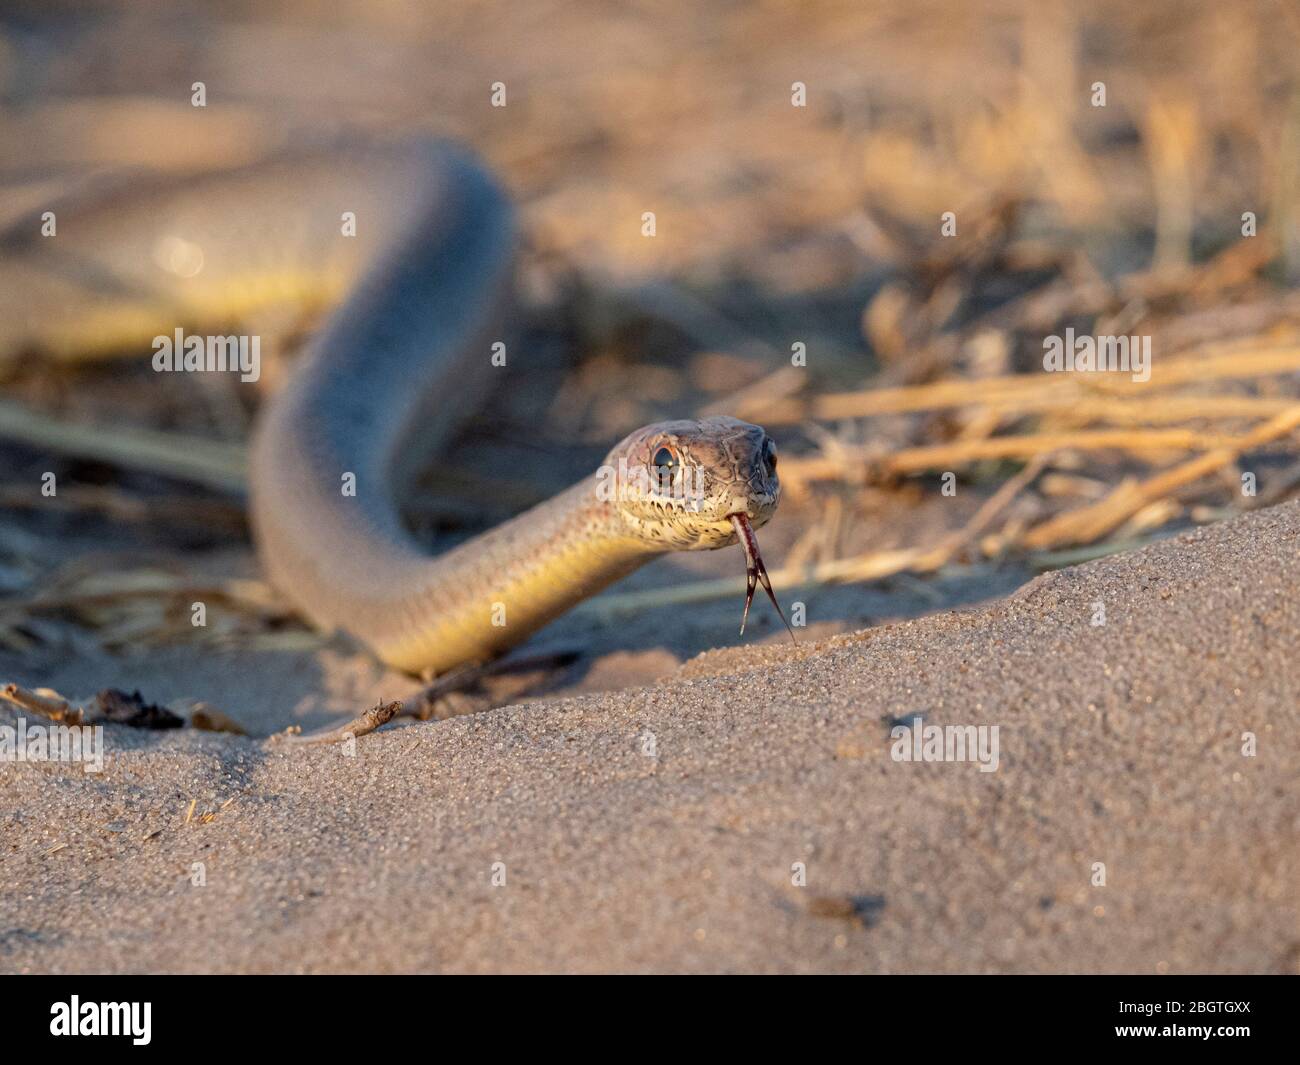 An adult olive grass snake, Psammophis mossambicus, in the Okavango Delta, Botswana, South Africa. Stock Photo